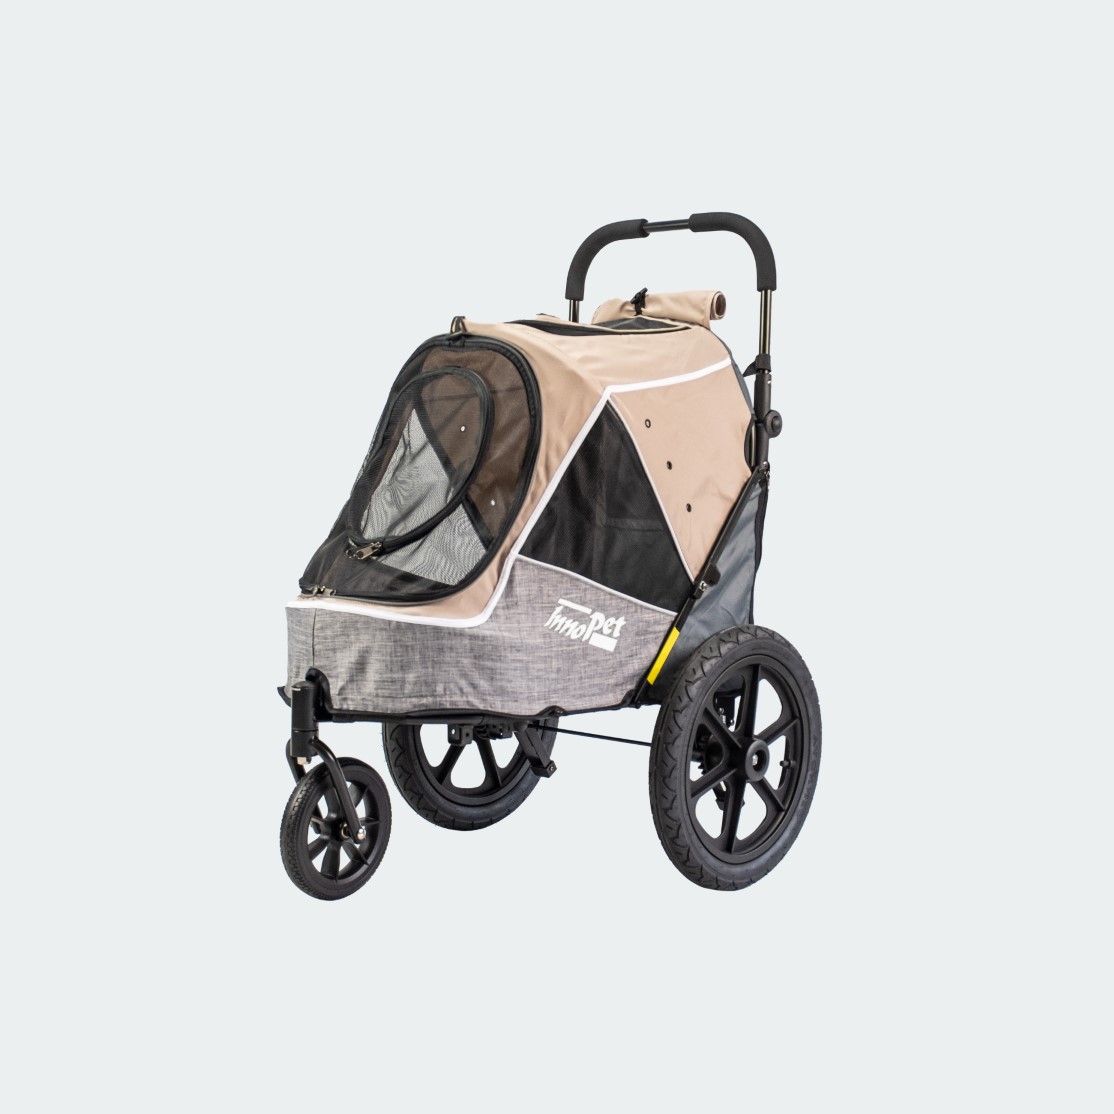 Pet stroller <b>Sporty Trailer Evolution </b> for bicycle, air w